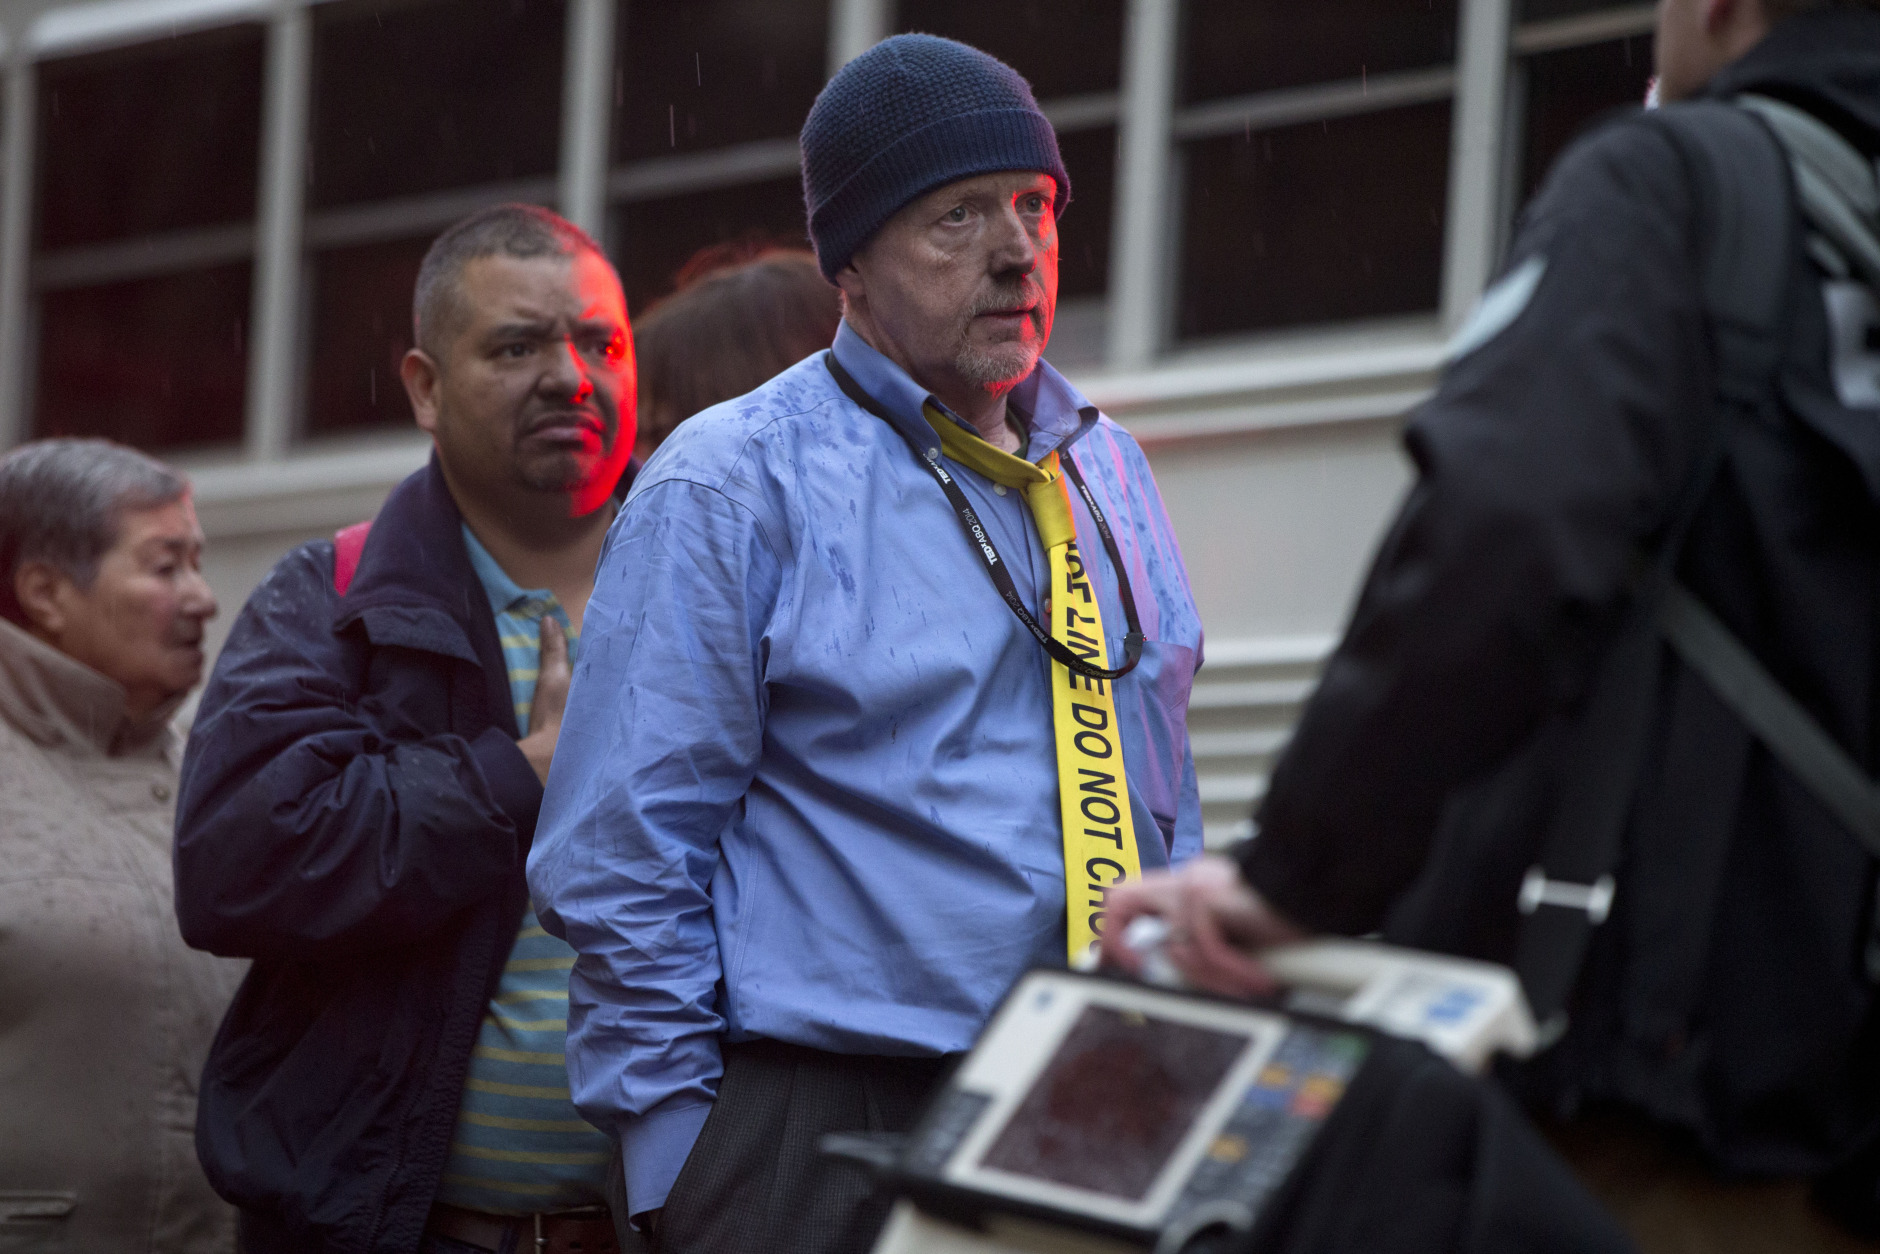 A man with a tie that says "Police Line Do Not Cross" waits in a triage line after being evacuated from a smoke filled Metro subway tunnel in Washington, Monday, Jan. 12, 2015. Metro officials say one of the busiest stations in downtown Washington has been evacuated because of smoke.  Authorities say the source of the smoke is unknown.  (AP Photo/Jacquelyn Martin)